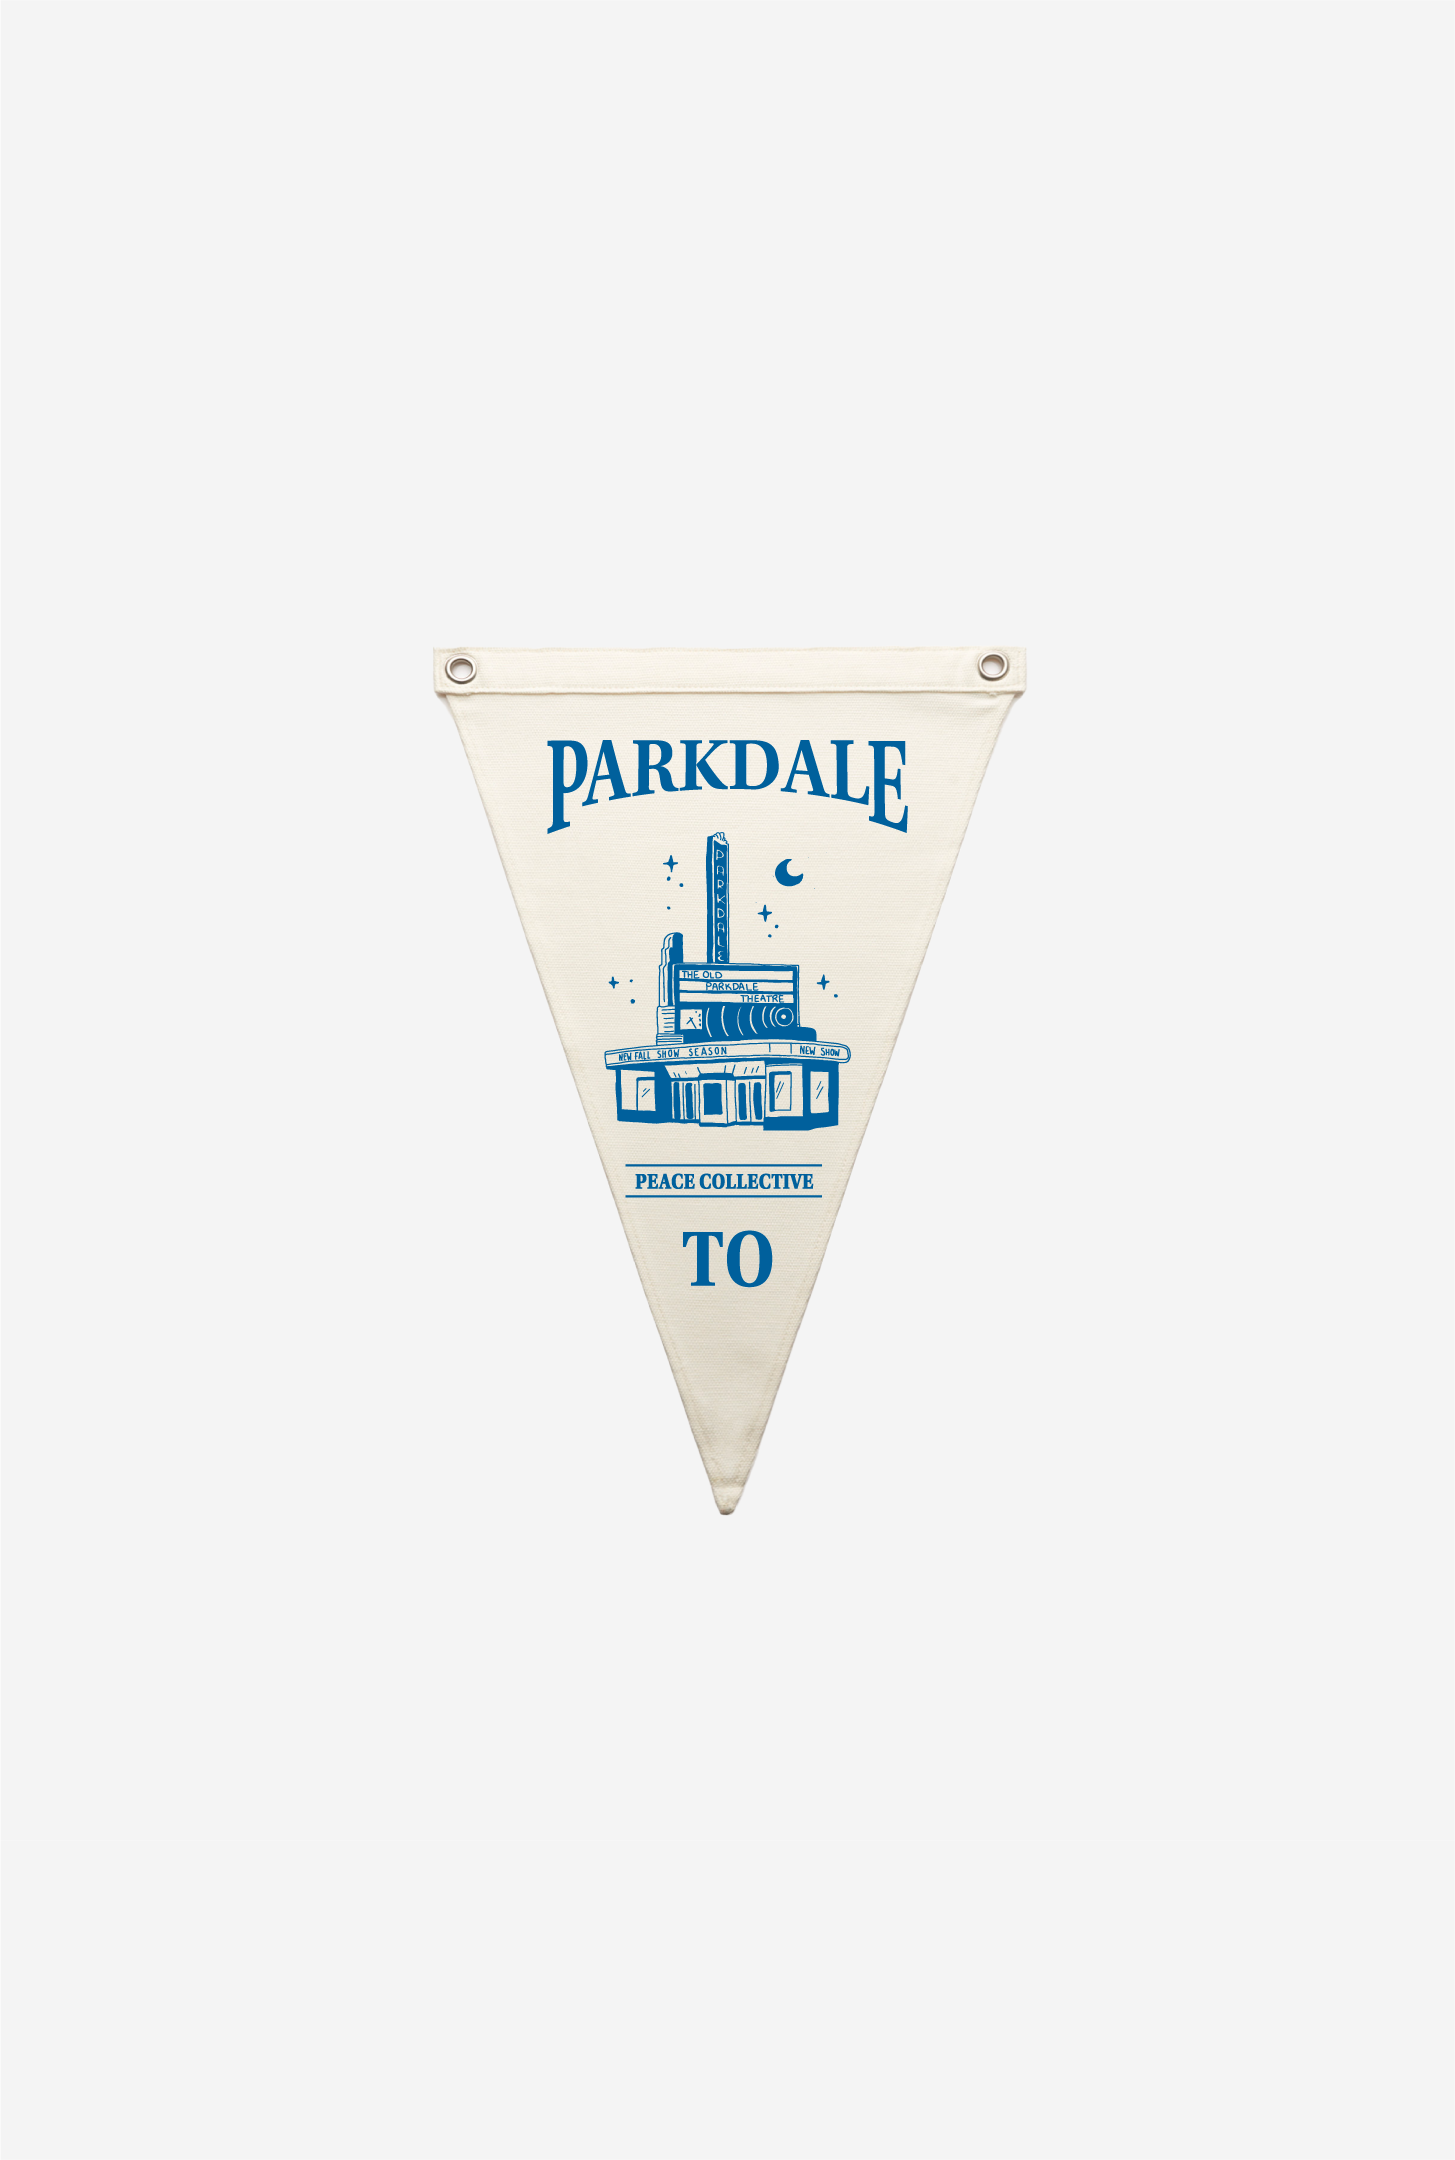 Parkdale Pennant